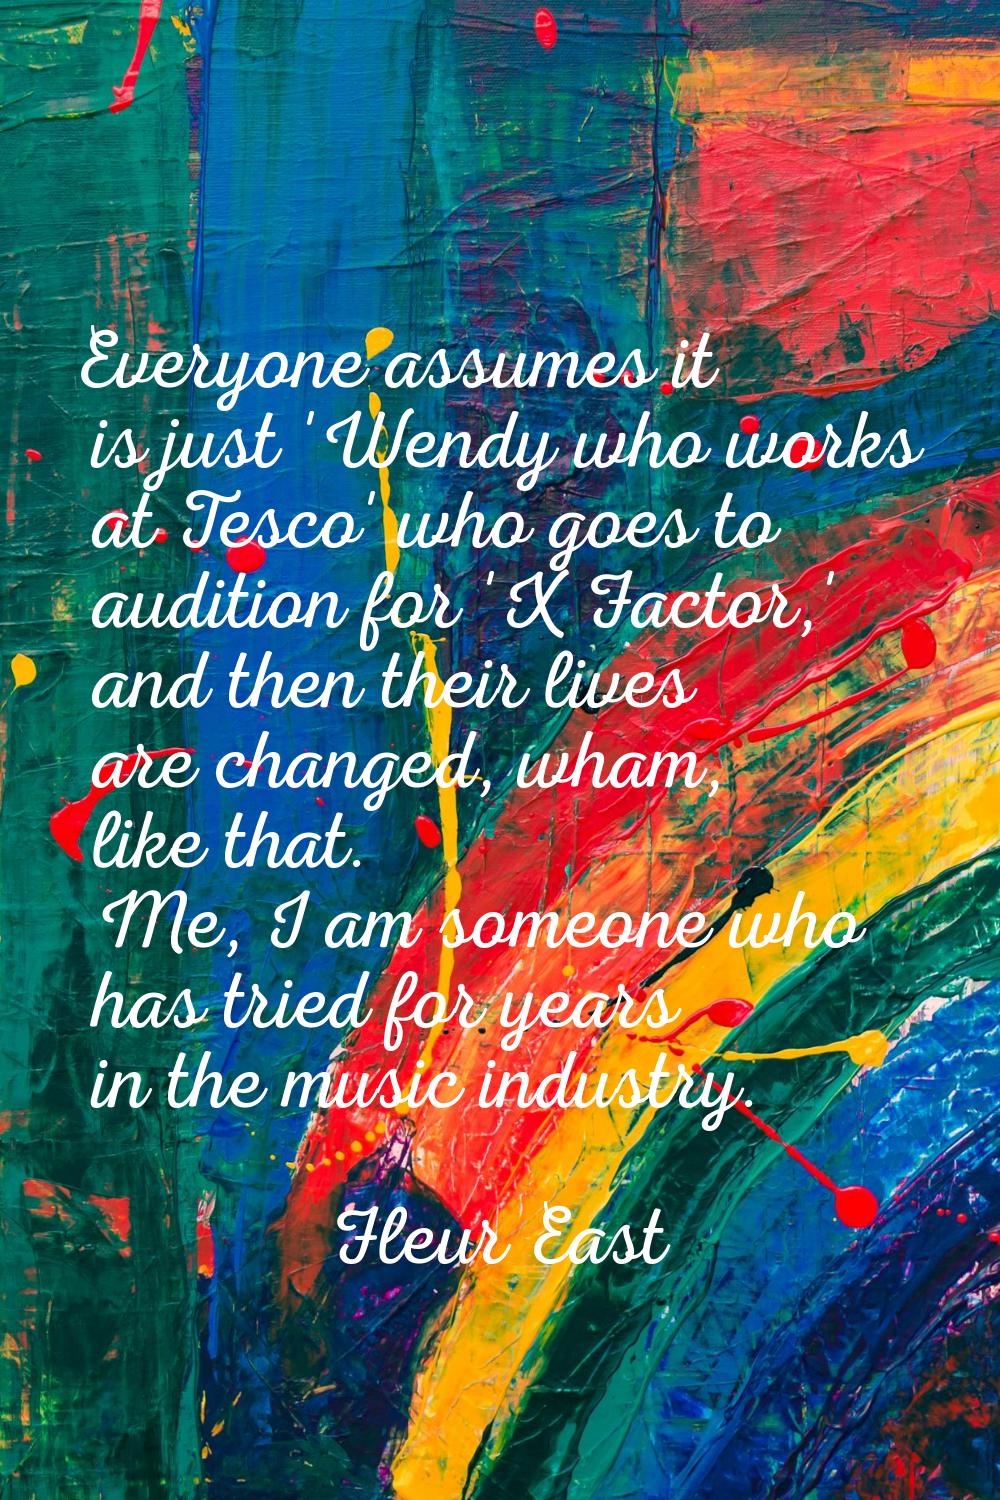 Everyone assumes it is just 'Wendy who works at Tesco' who goes to audition for 'X Factor,' and the